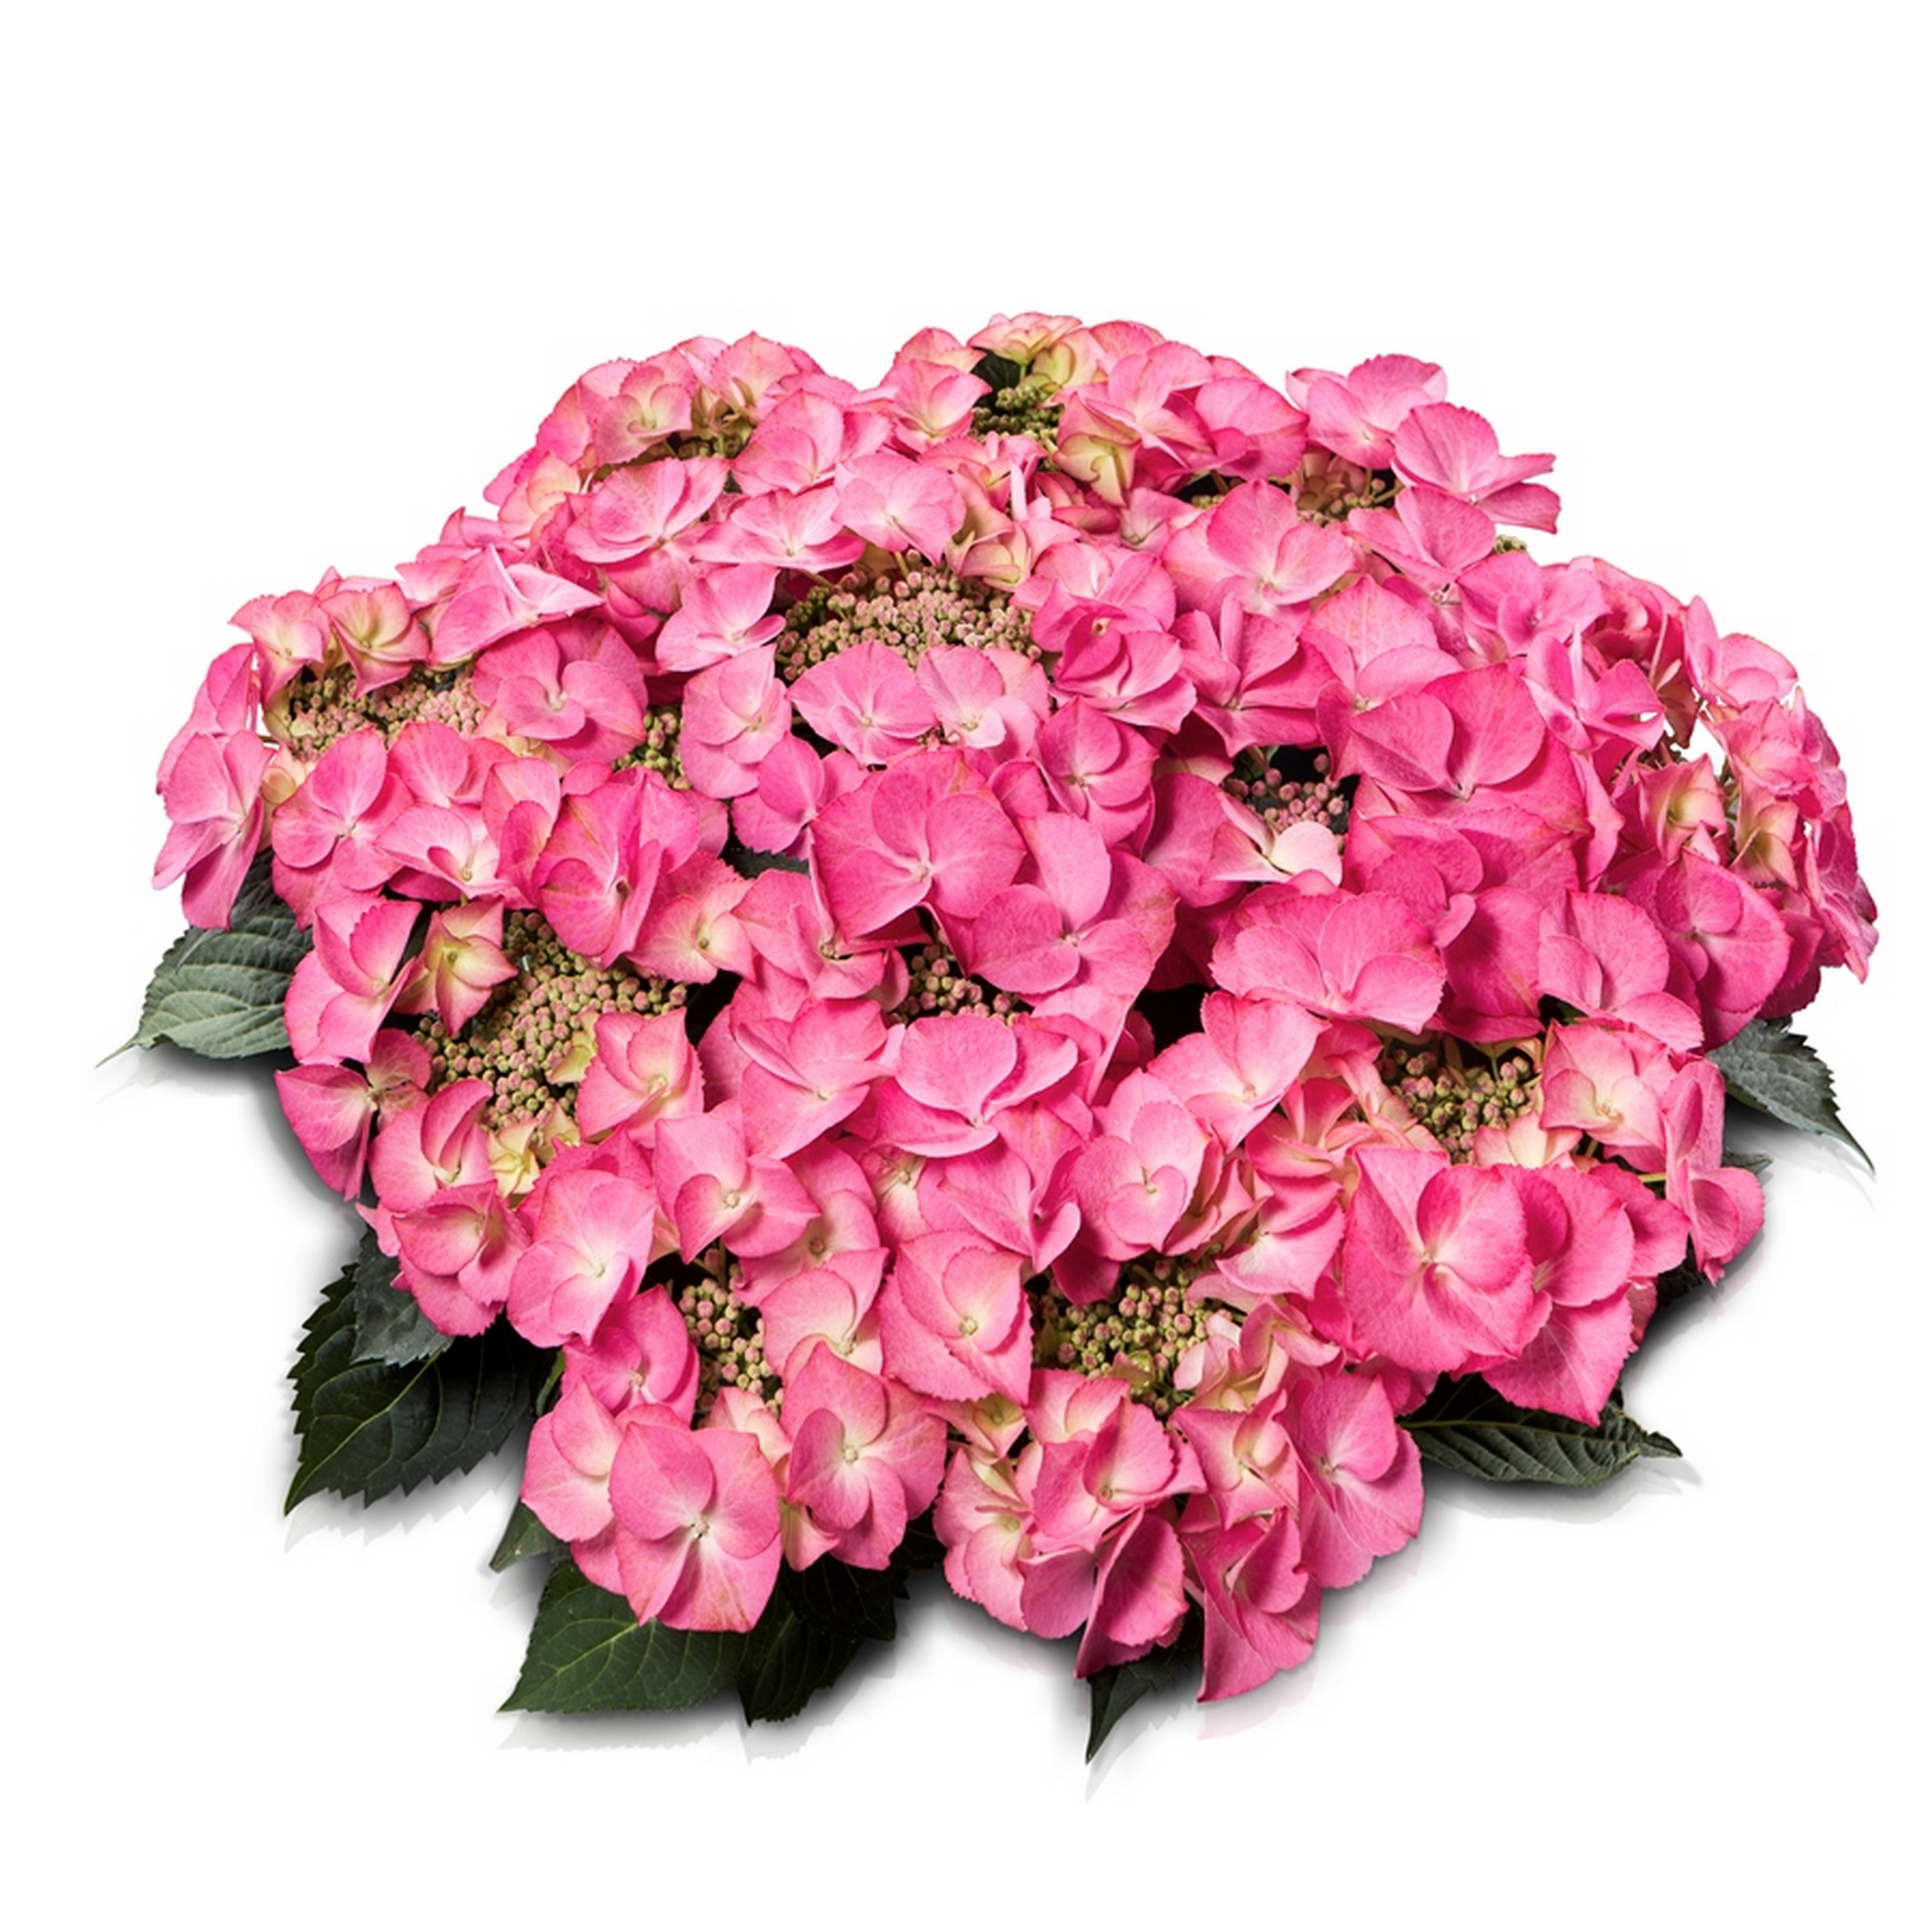 Hortensie 'Royalty® Tiffany Pink' Topf Ø 23 cm + product picture